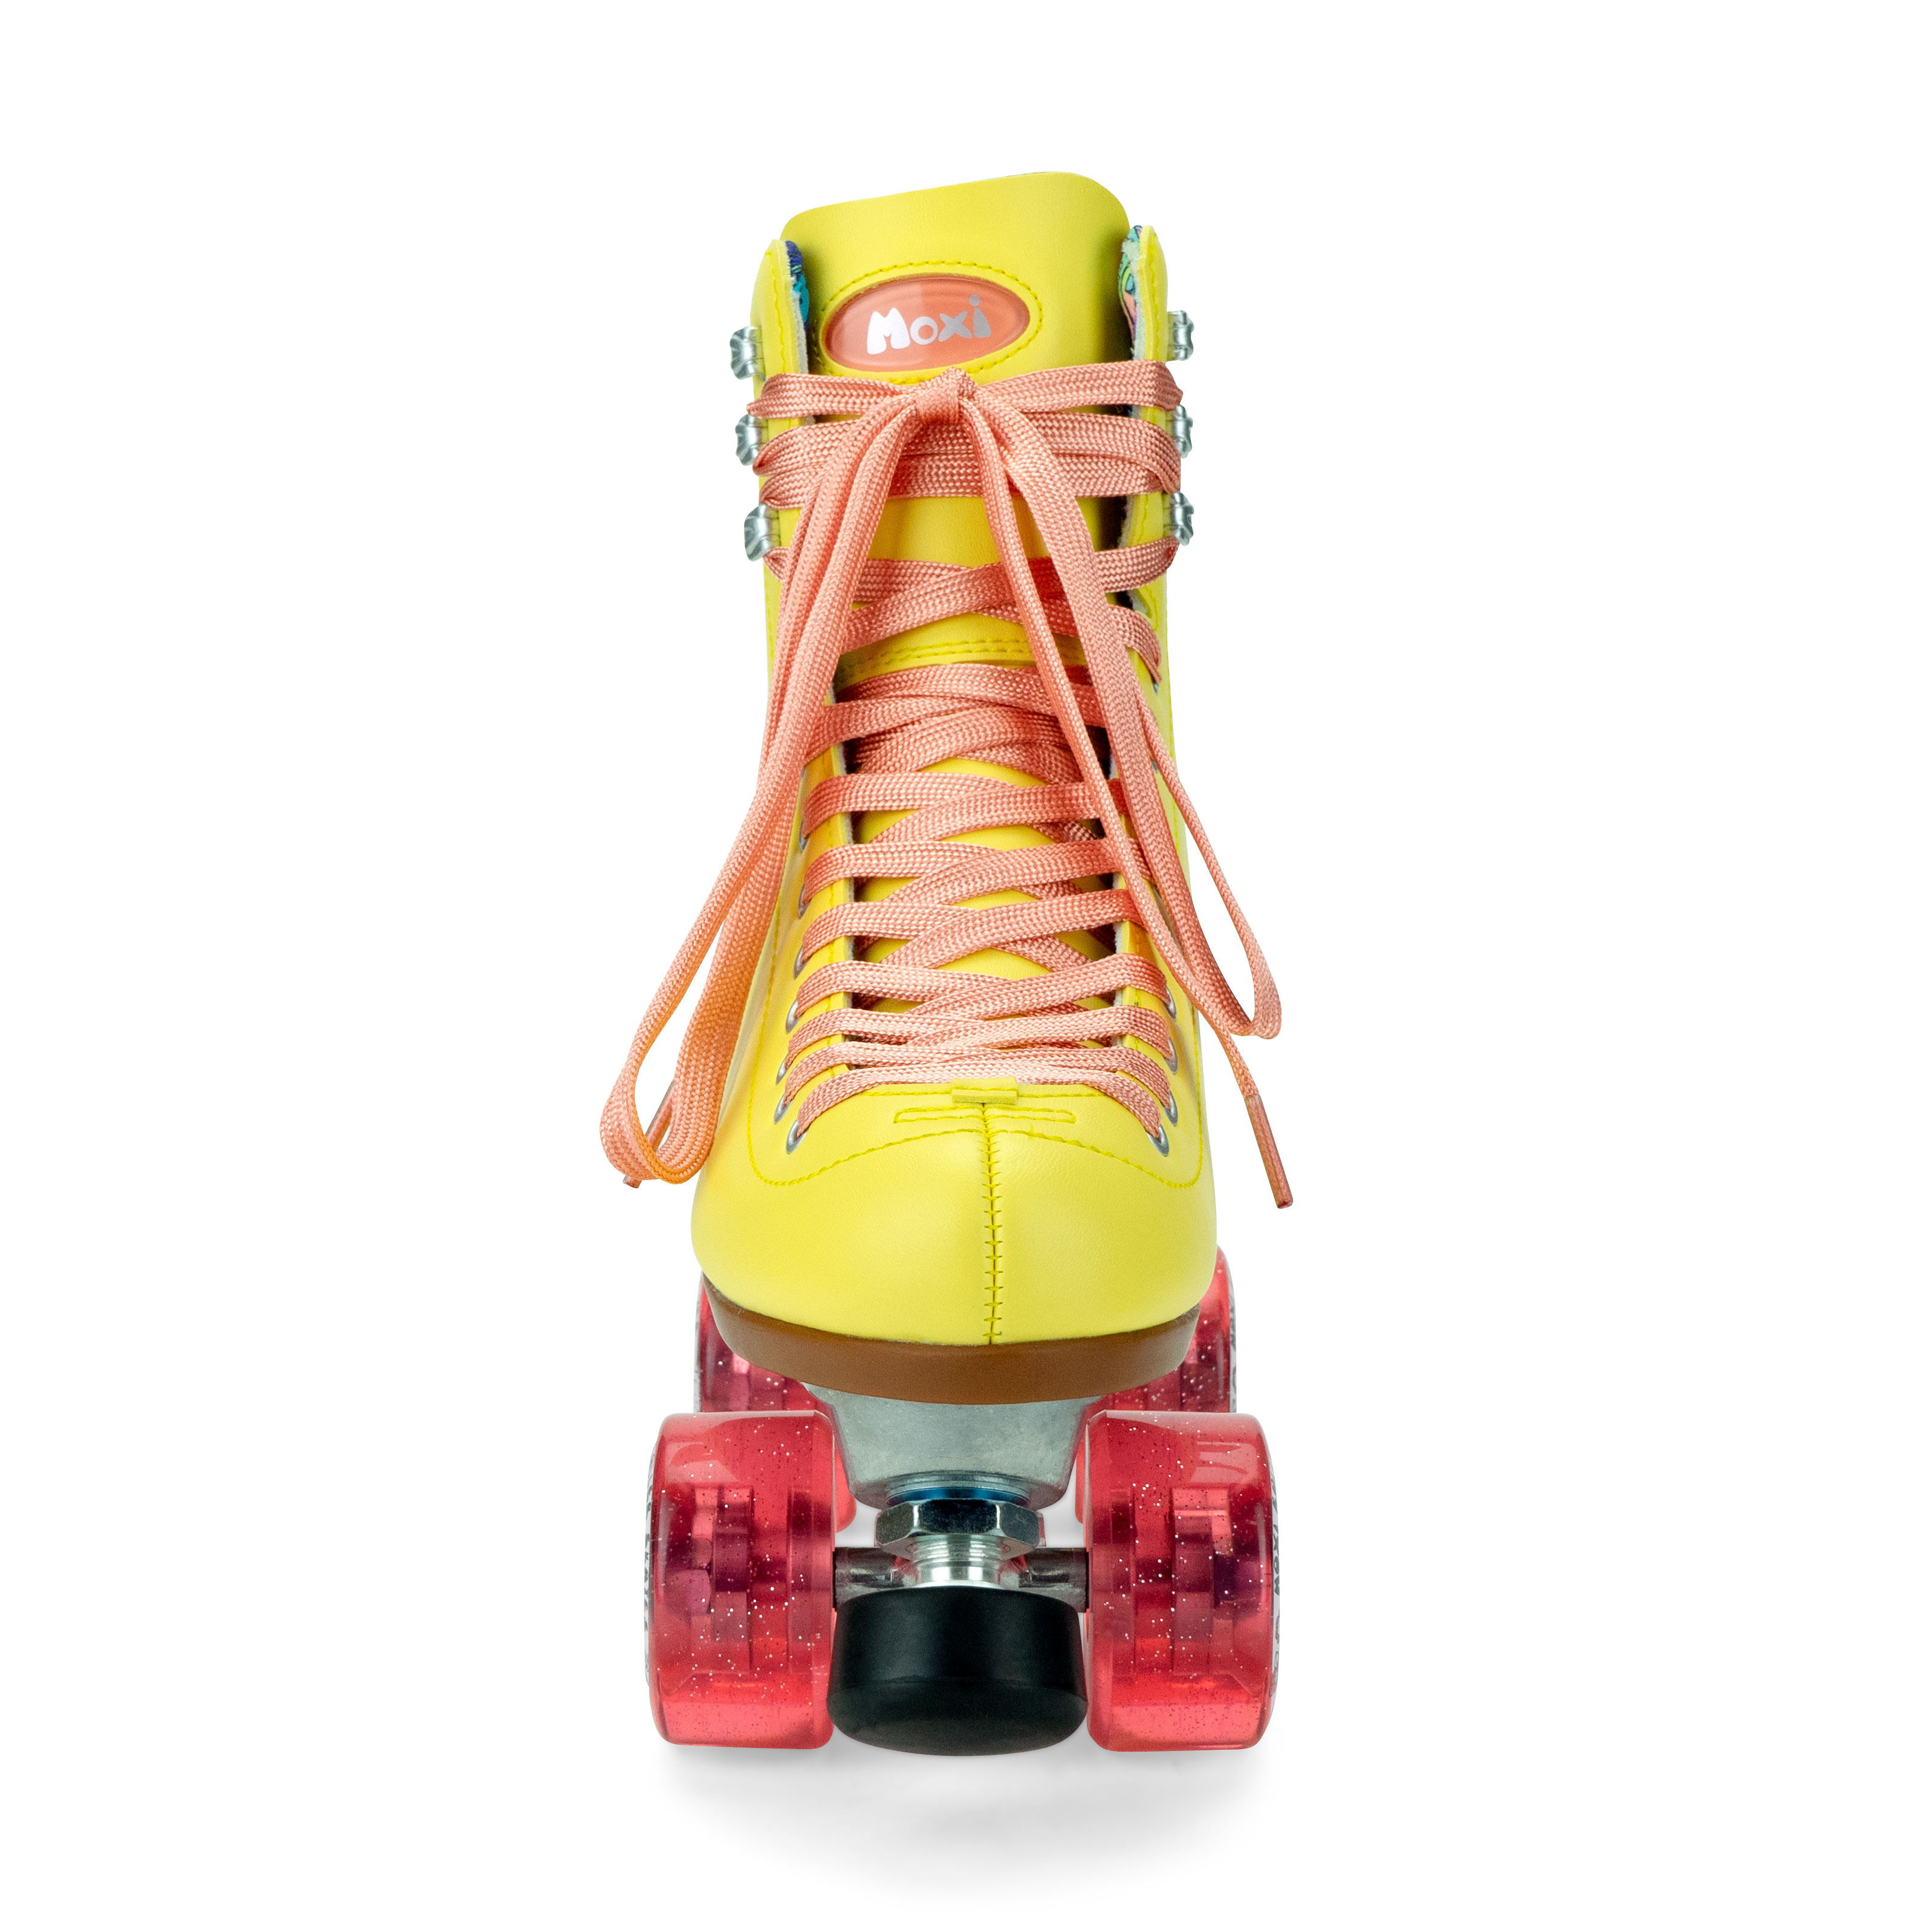 Holiday Deal - Moxi Beach Bunny Roller Skates + Accessories 30% OFF